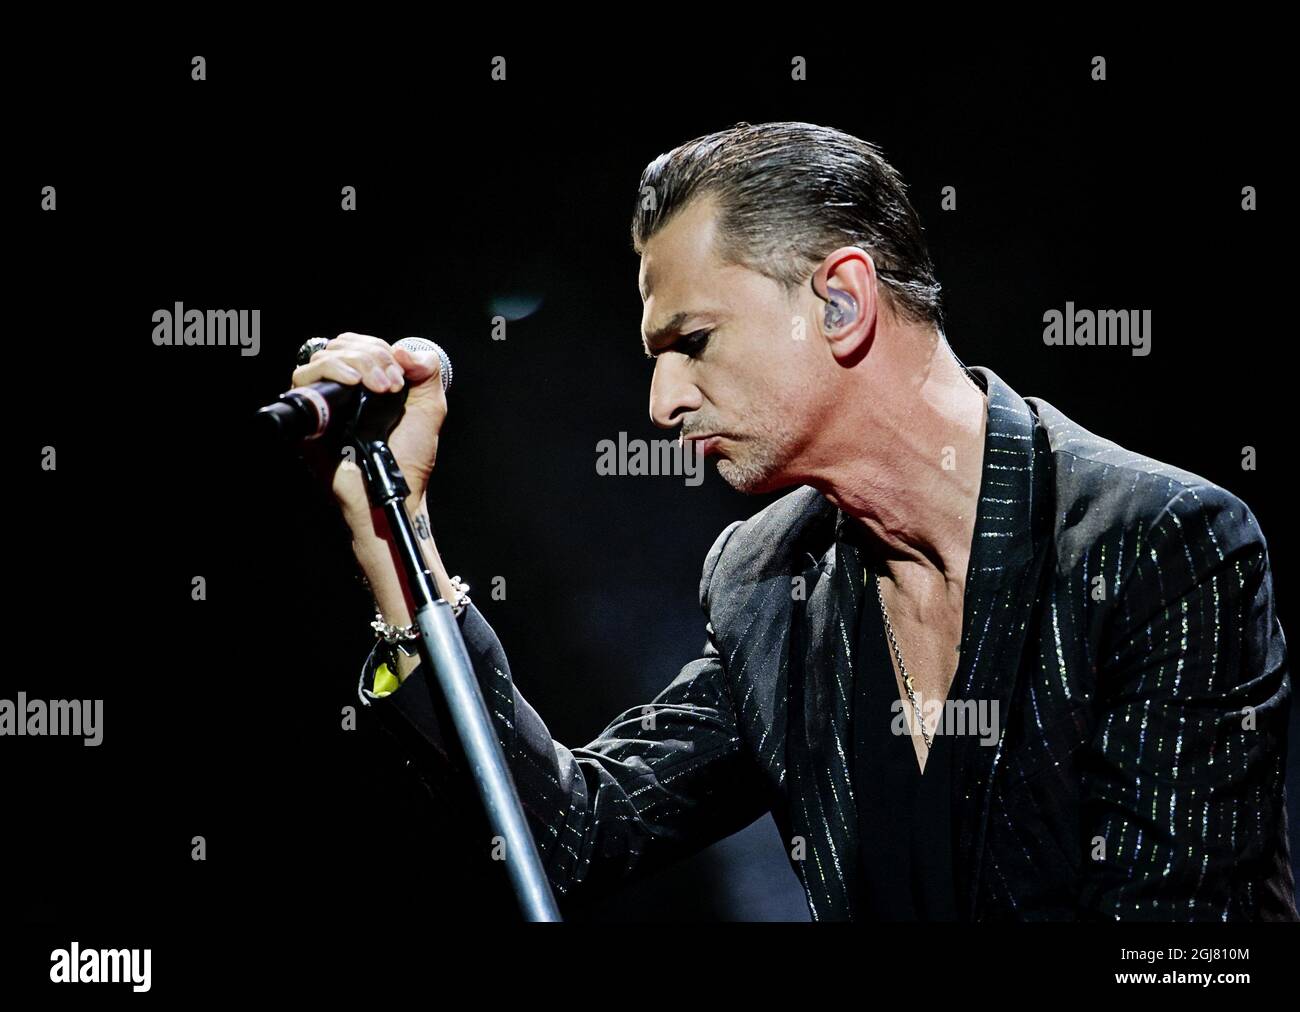 Depeche Mode Live Music High Resolution Stock Photography and Images - Alamy